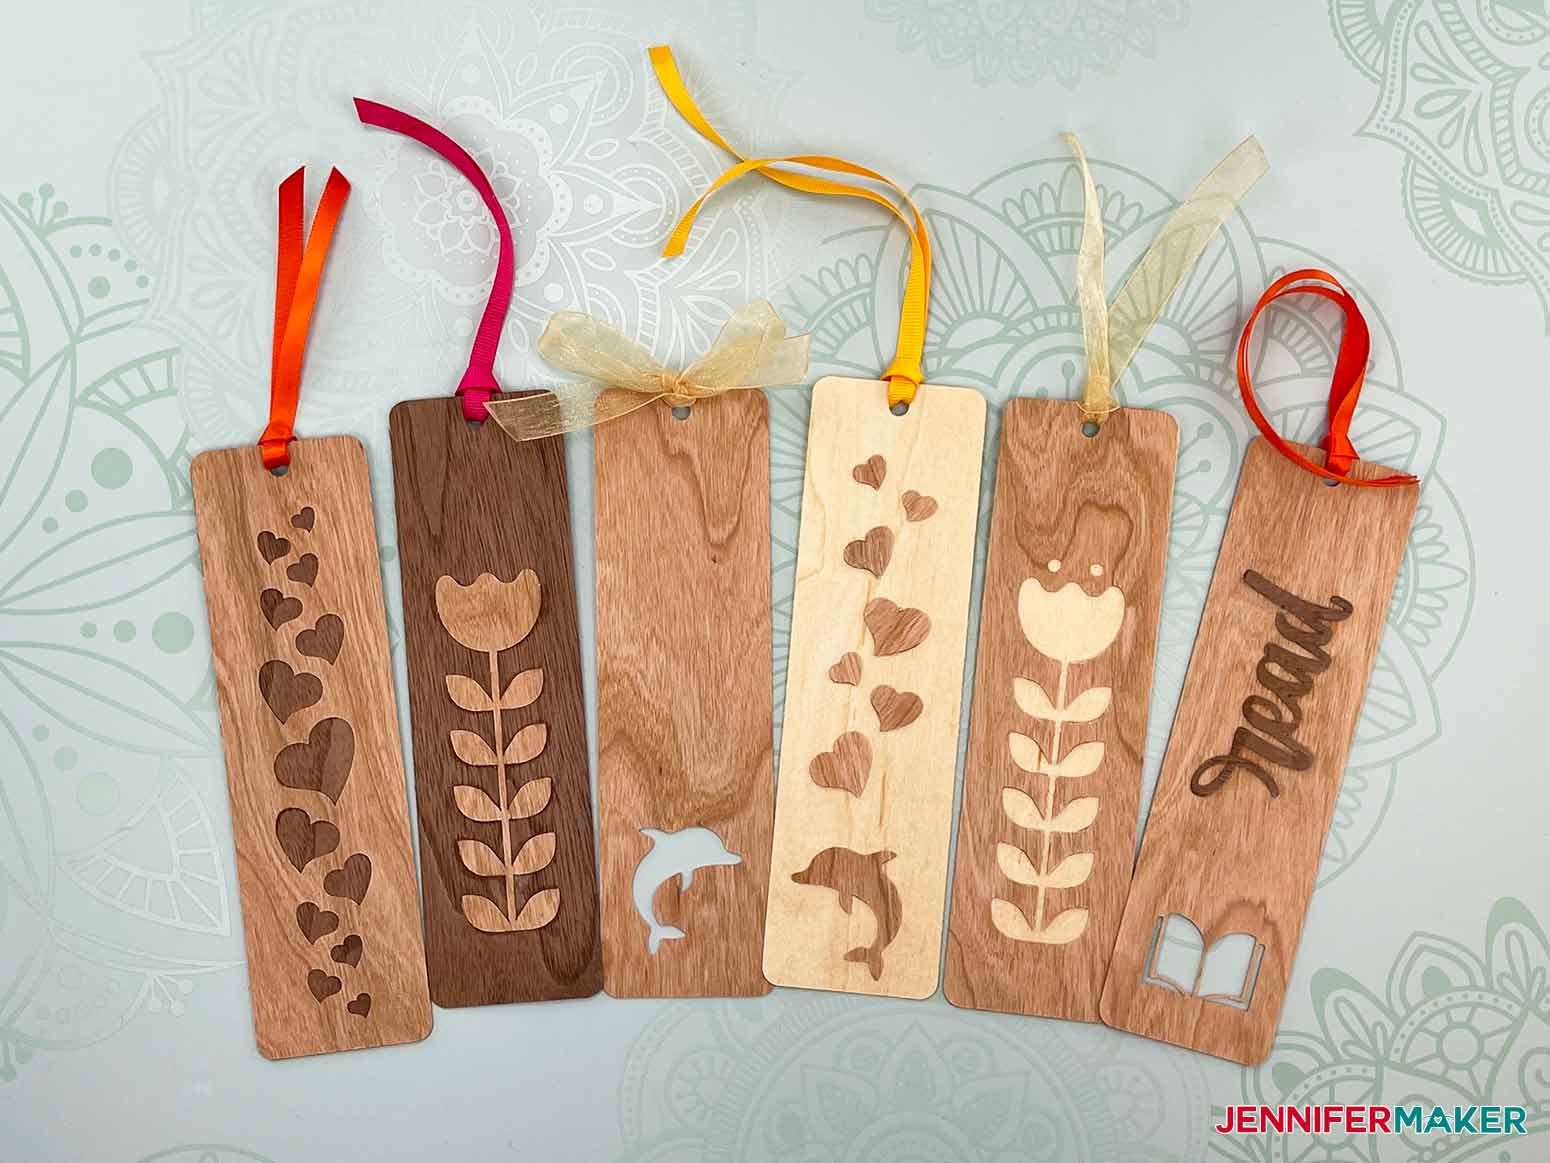 These are what some of my finished bookmarks look like from my Wooden Bookmarks project